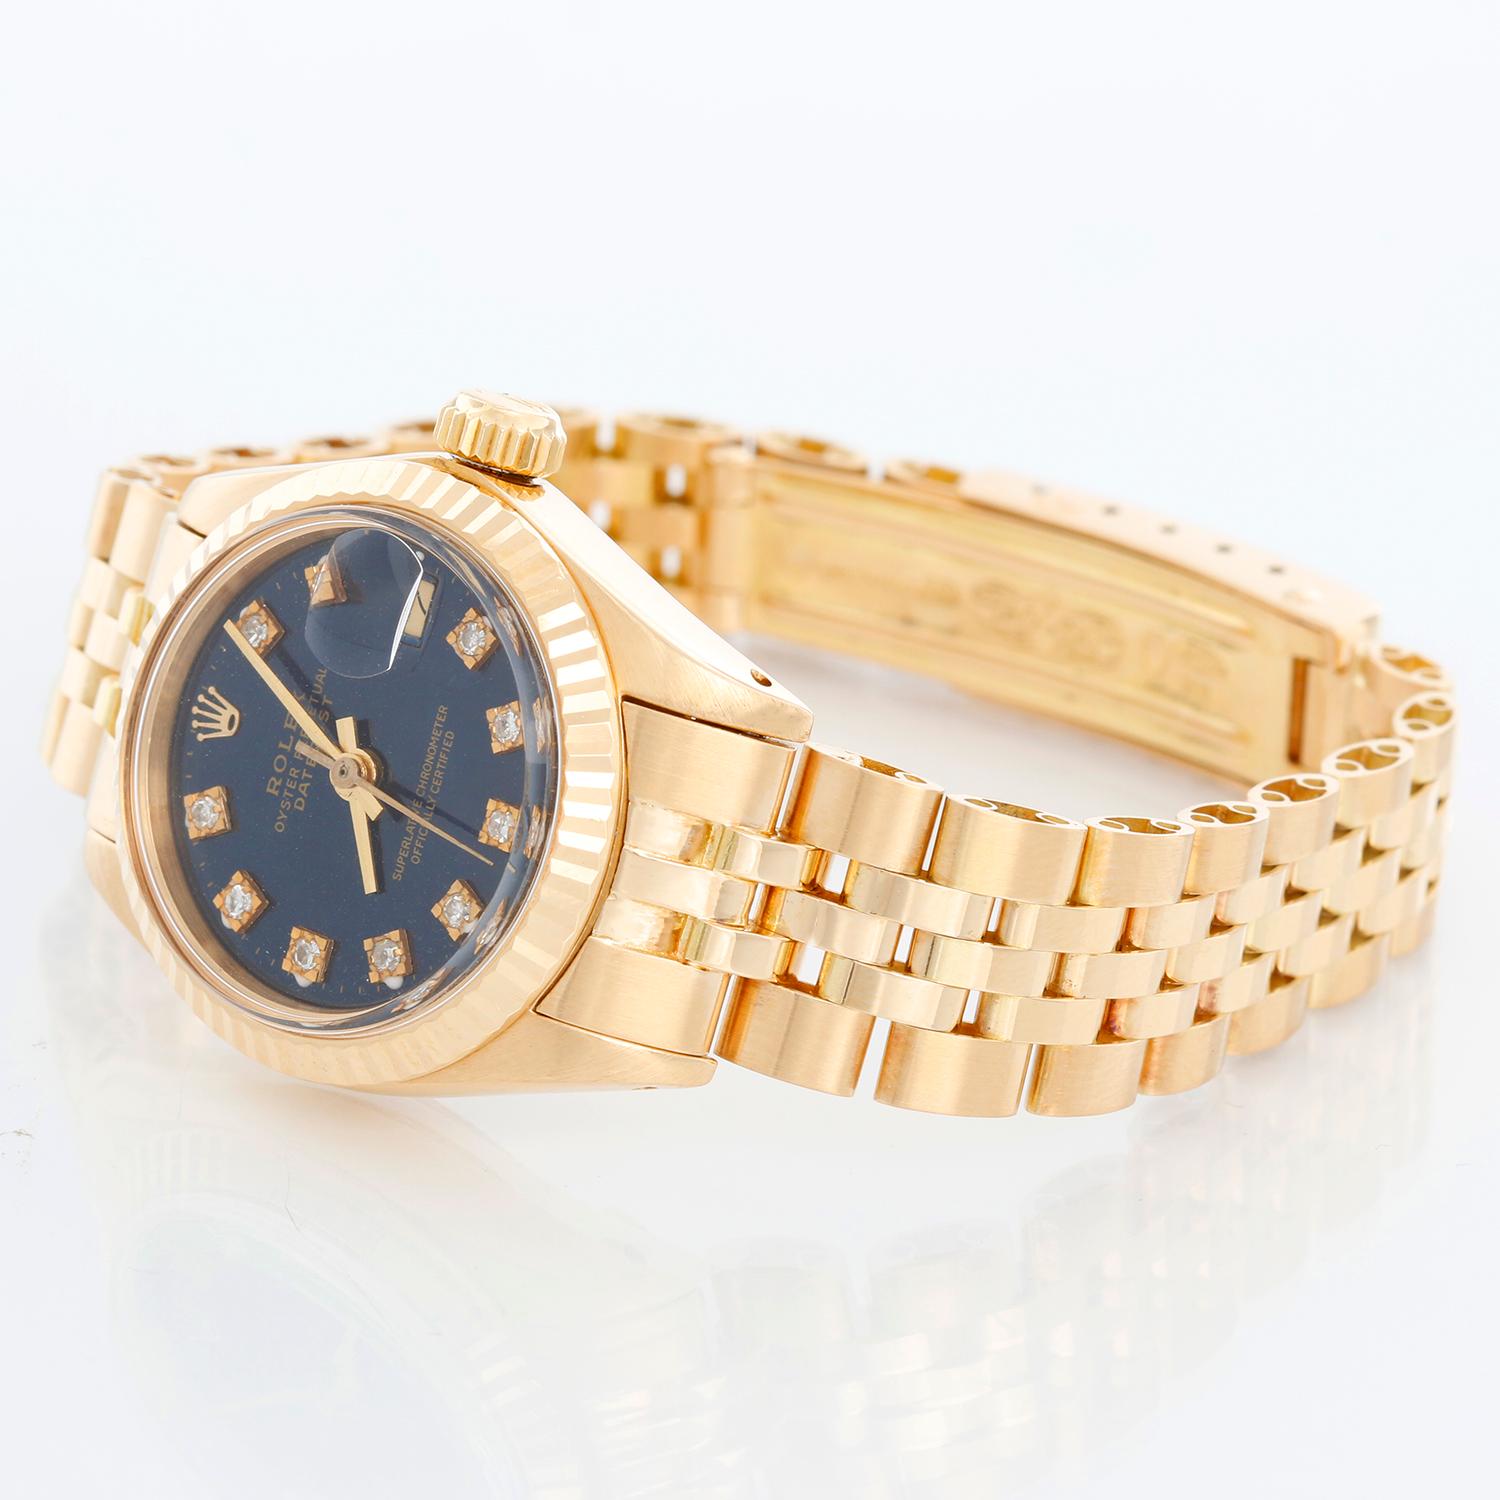 Rolex Ladies 18k Yellow Gold Watch  6917 - Automatic winding. 18k yellow gold case with fluted bezel  (26mm diameter). Custom  blue  diamond dial. 18k yellow gold jubilee bracelet. Pre-owned with box and books.